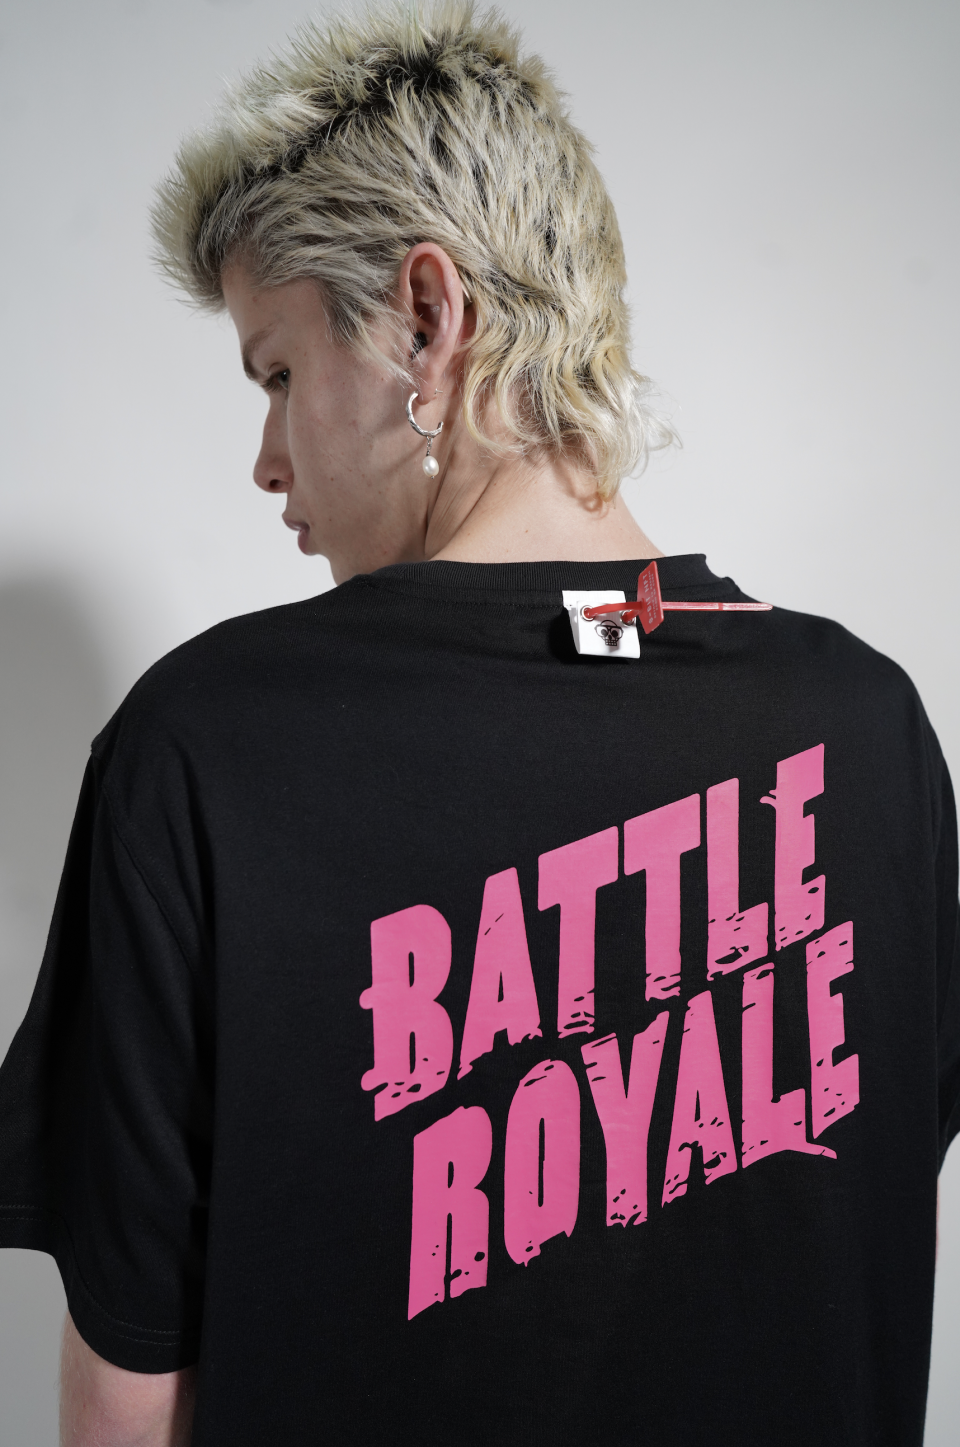 The “Battle Royale” shirt, with security tag in view. All of the items are tagged and feature a QR code that shuttles patrons into the metaverse. - Credit: Courtesy photo